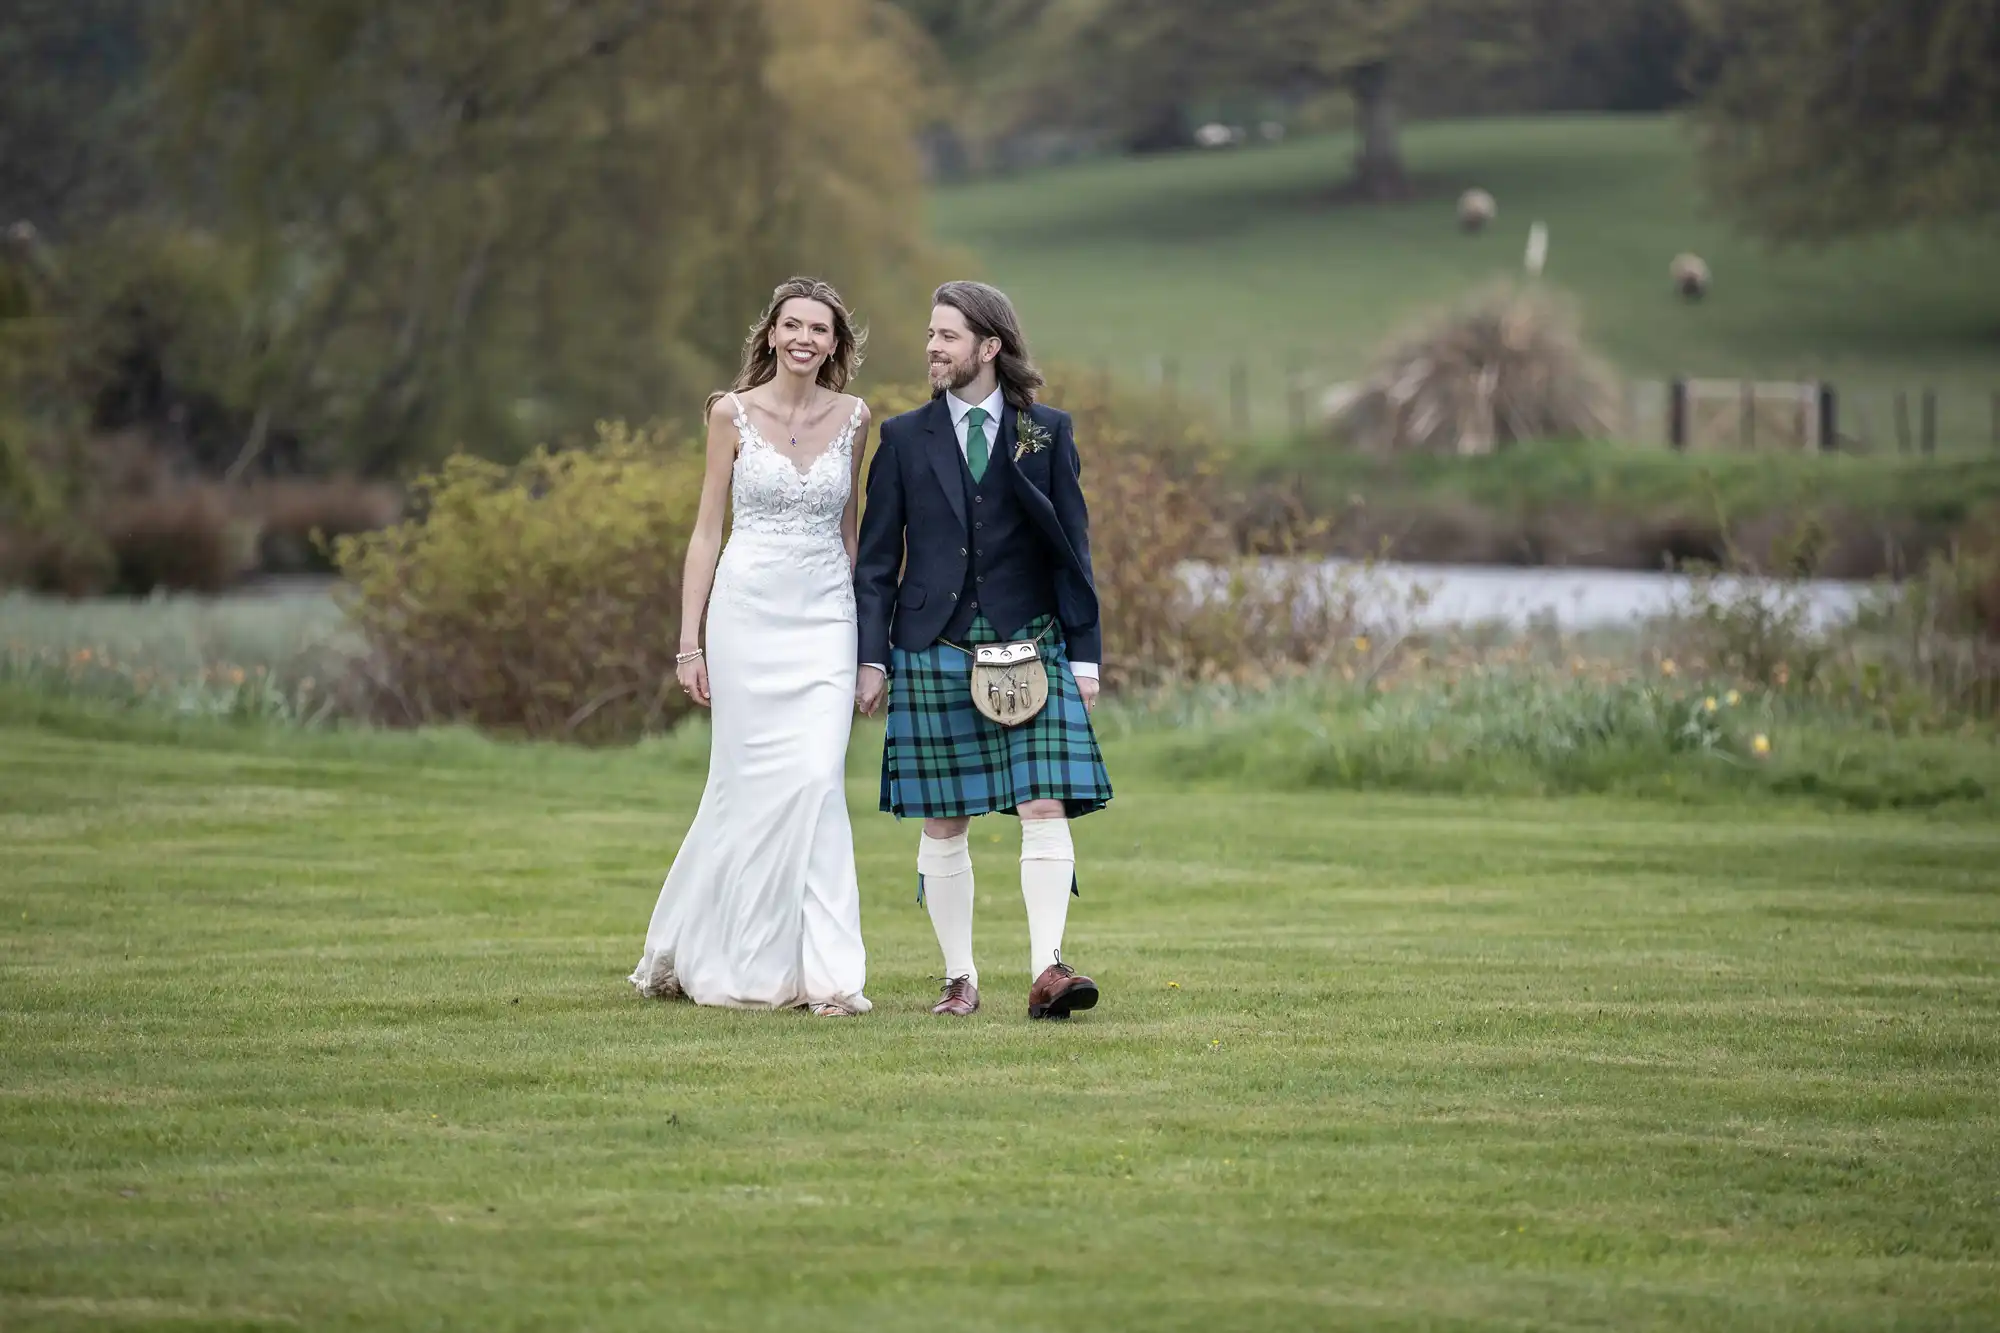 A bride in a white dress and groom in a kilt walk hand in hand on a grassy field with lush greenery and a body of water in the background.